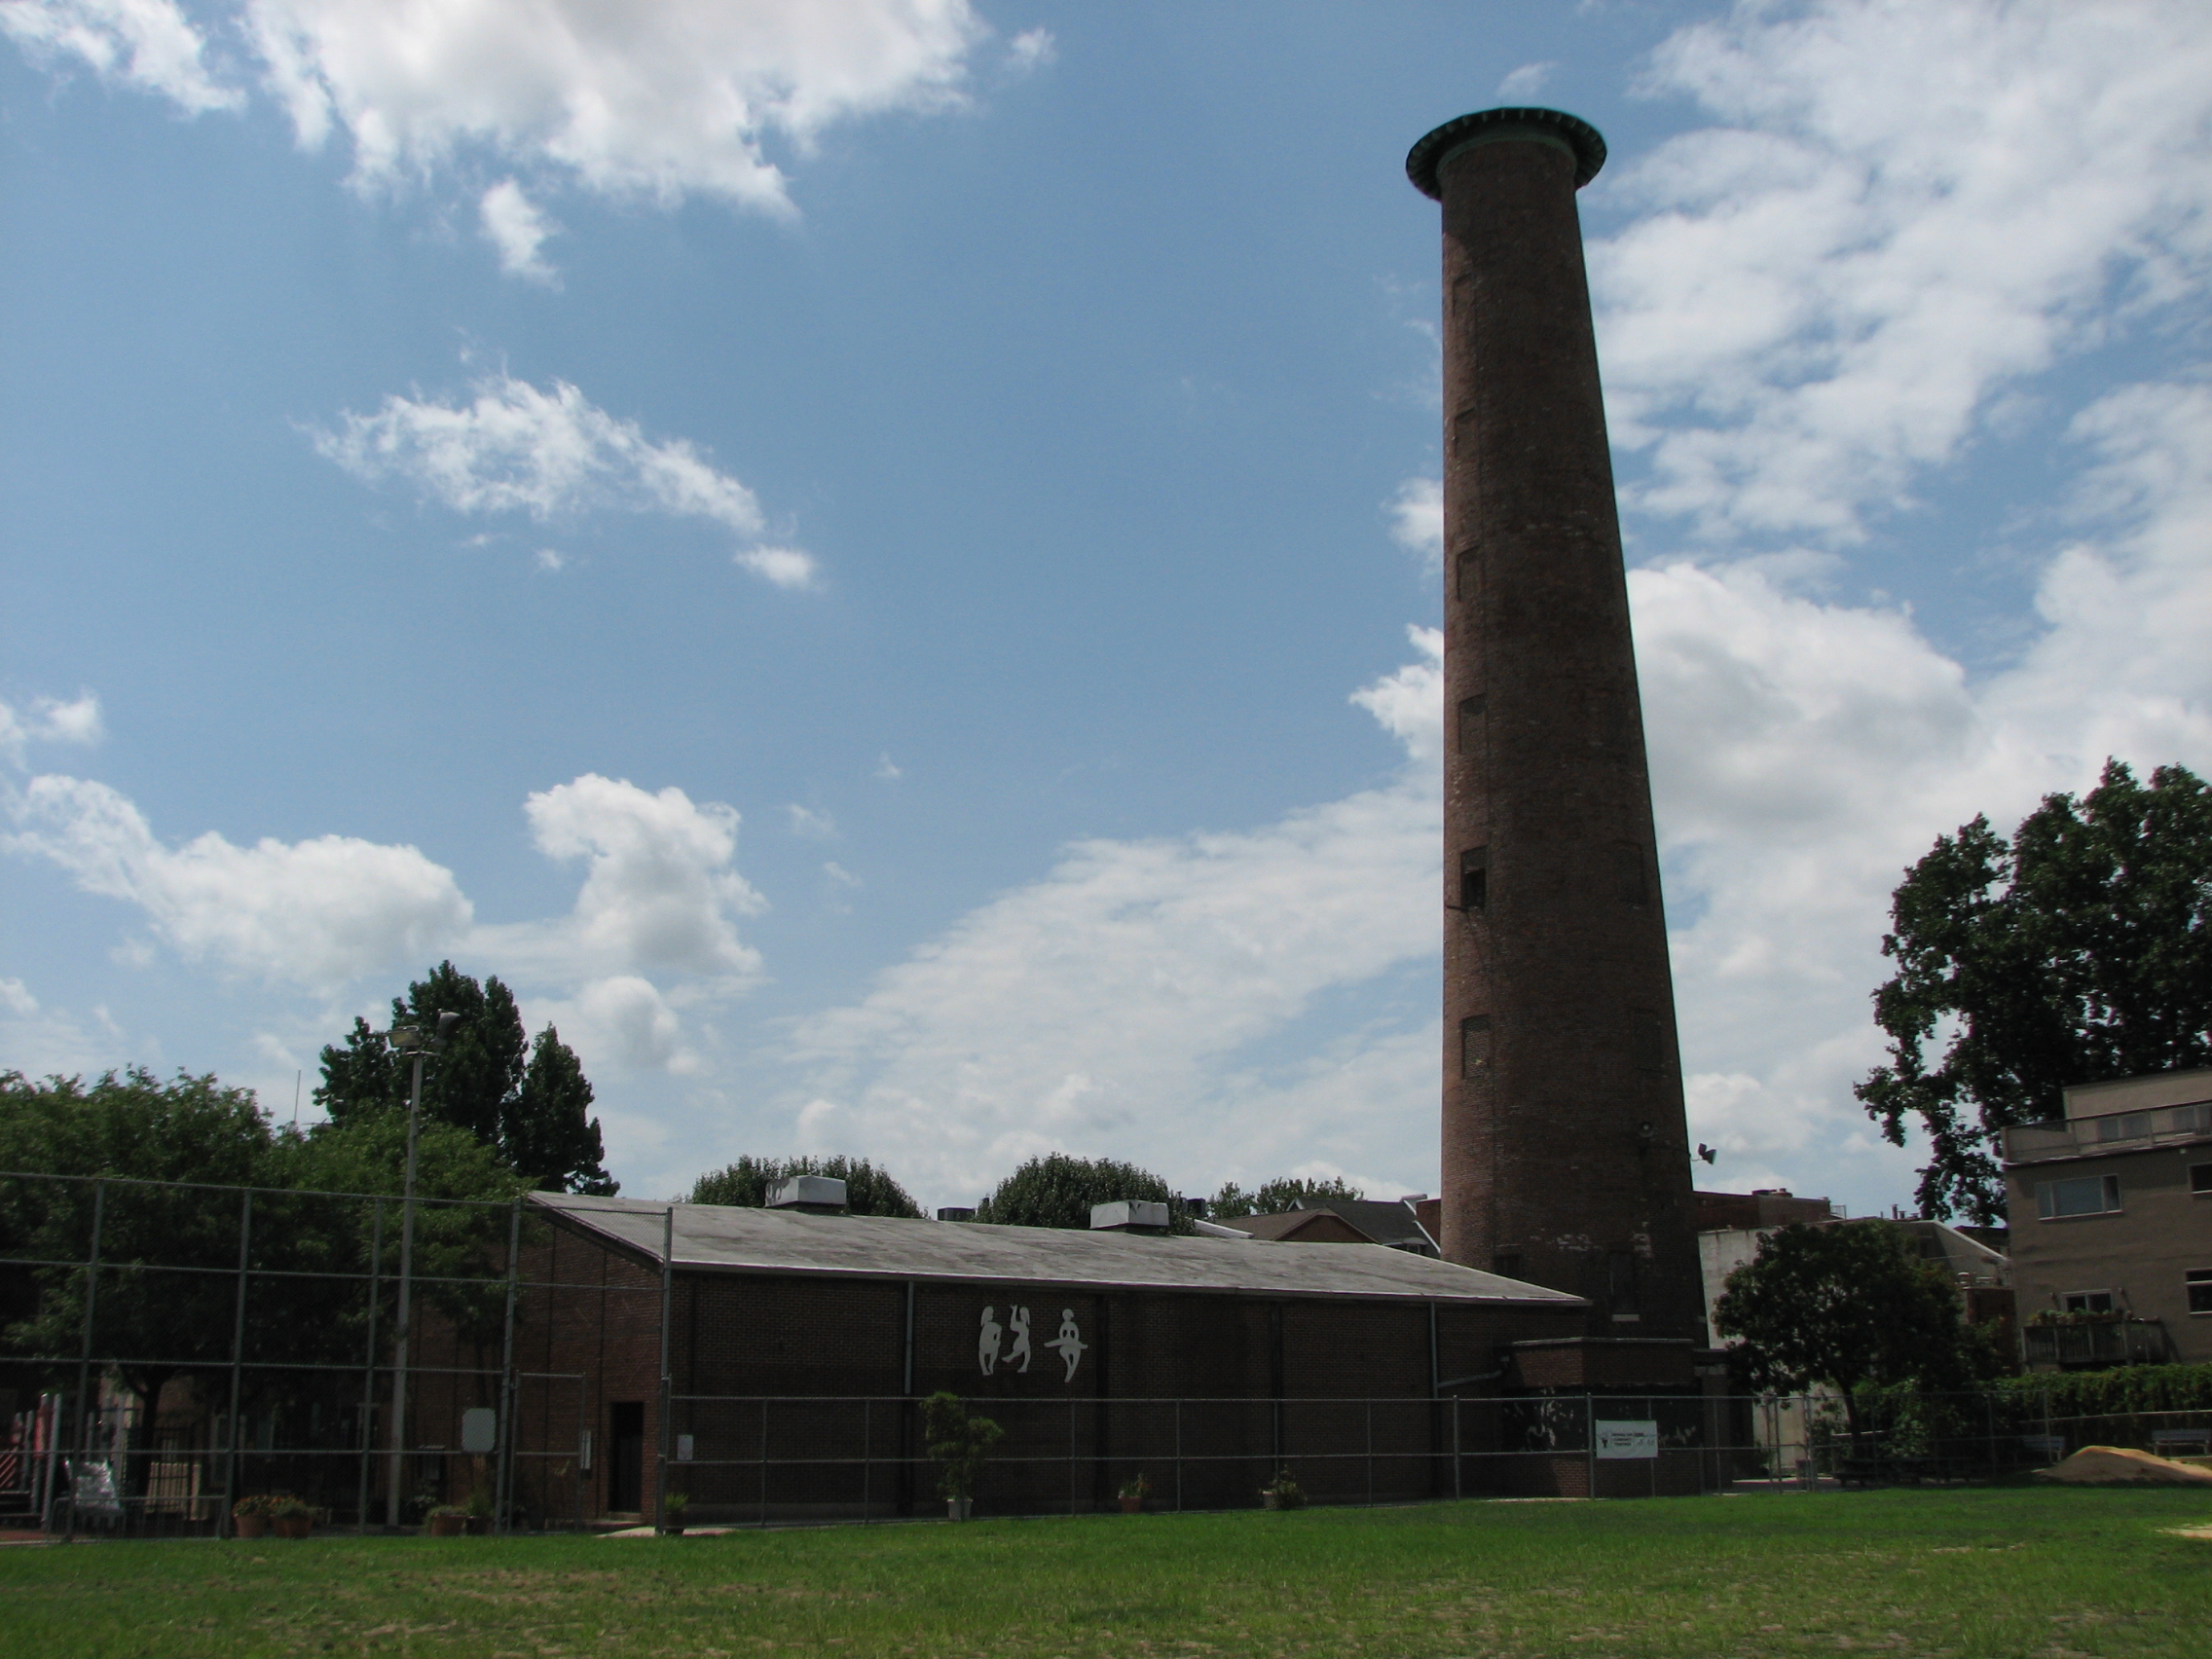 The low brick rec center huddles at the base of the tower.